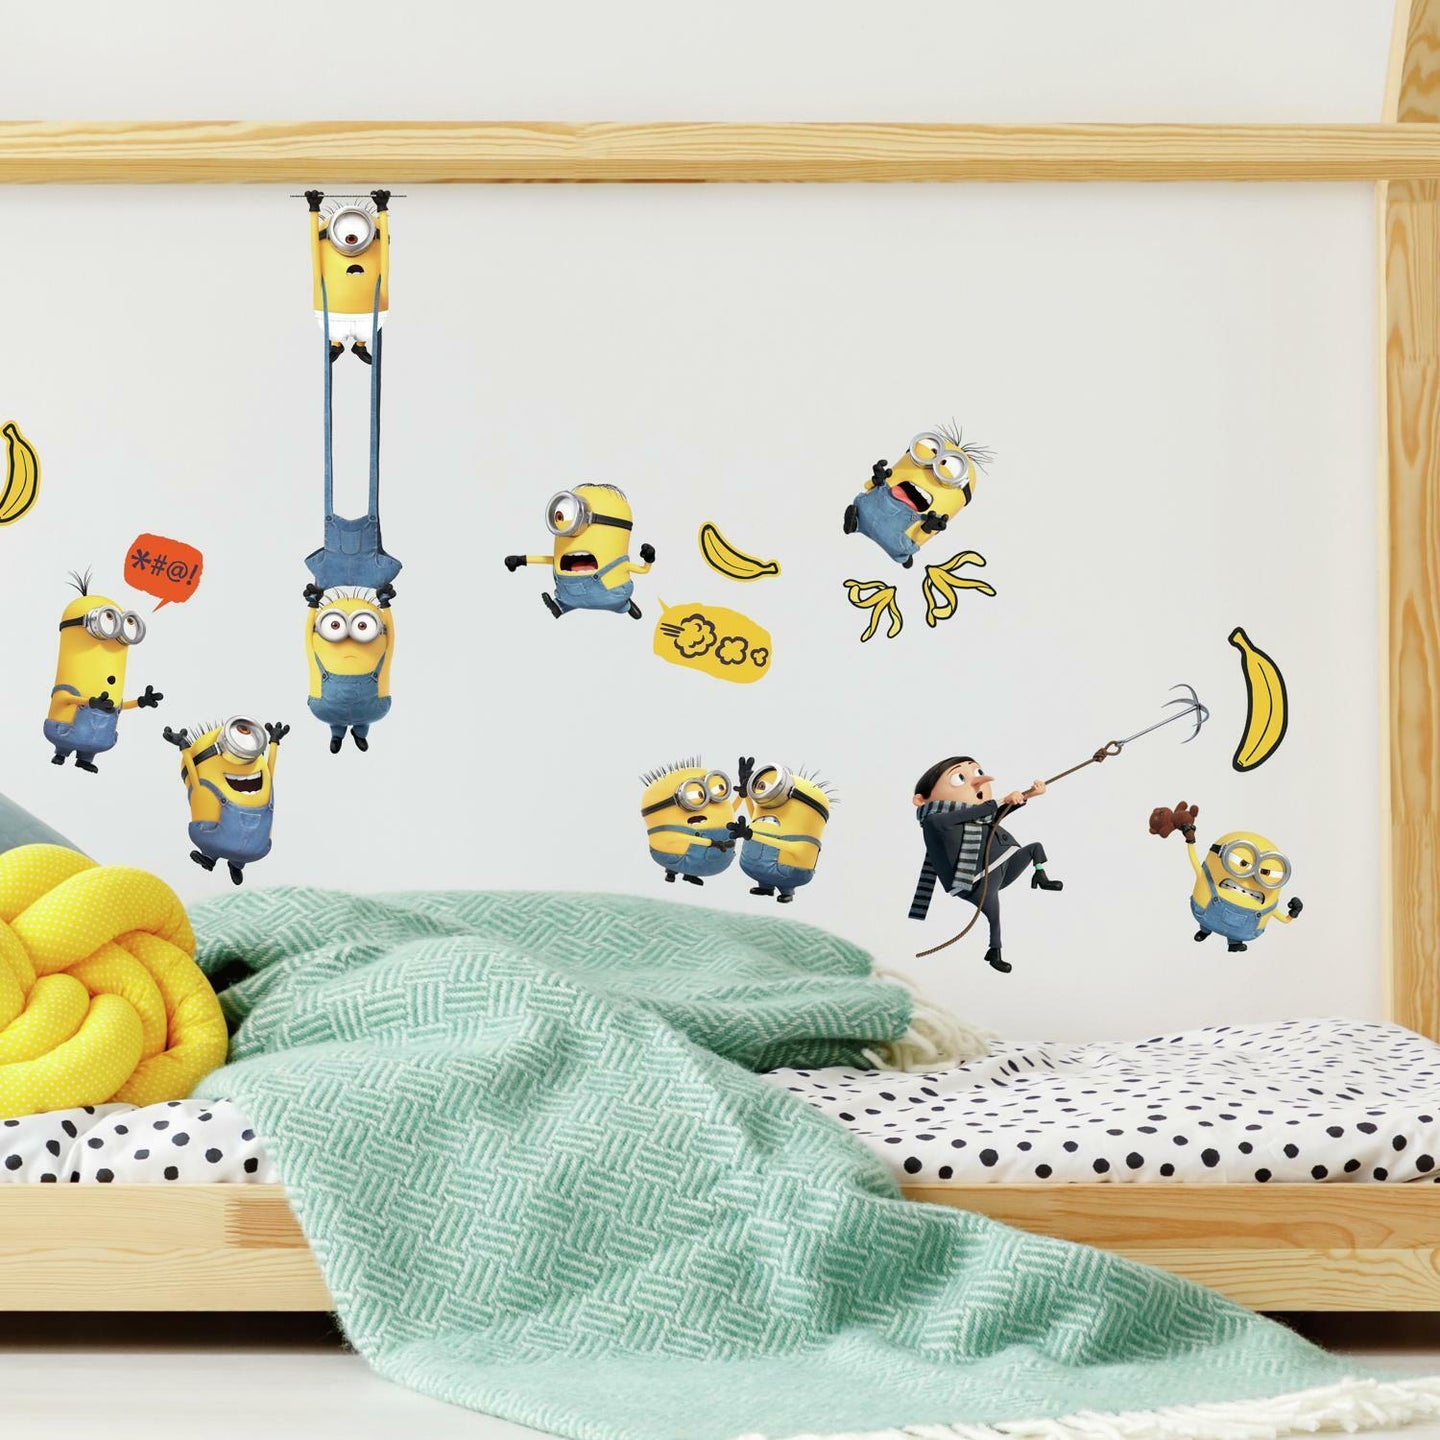 MINIONS 2 PEEL AND STICK WALL DECALS